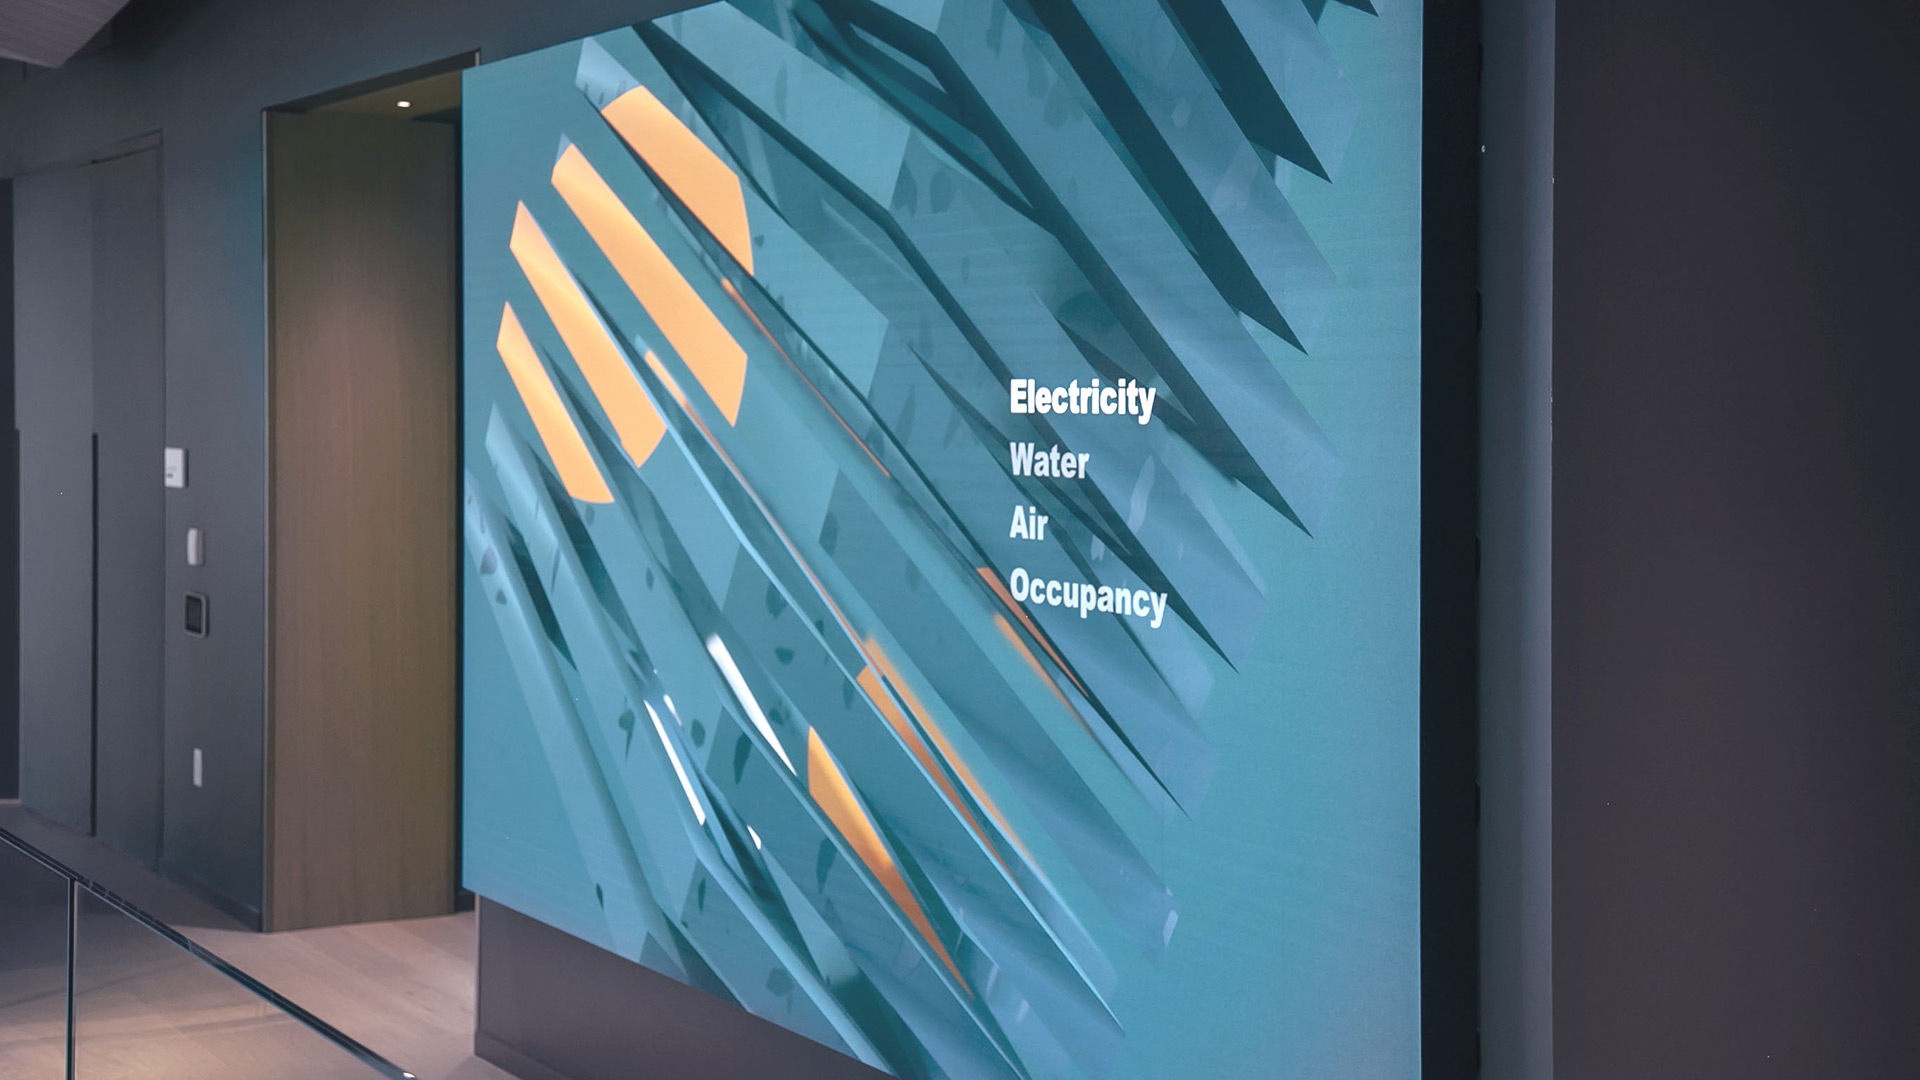 A side view of a large lobby display showing a the digital art sculpture called Day. The sculpture is formed based of live data measured within the building: Electricity, Water, Air and Occupancy.